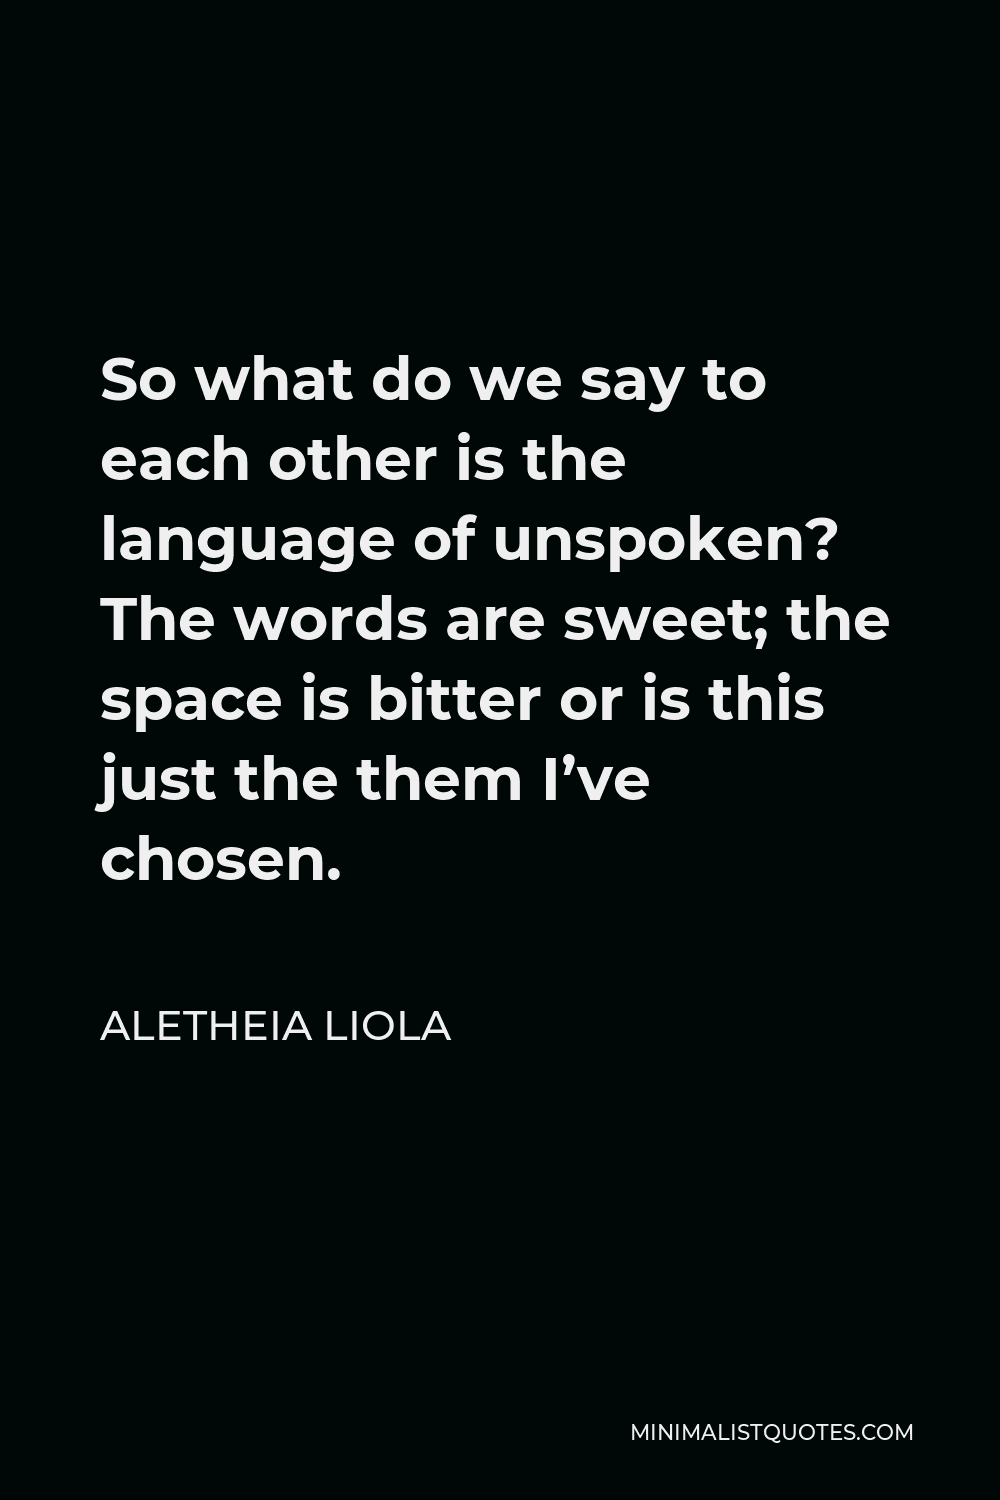 Aletheia Liola Quote - So what do we say to each other is the language of unspoken? The words are sweet; the space is bitter or is this just the them I’ve chosen.